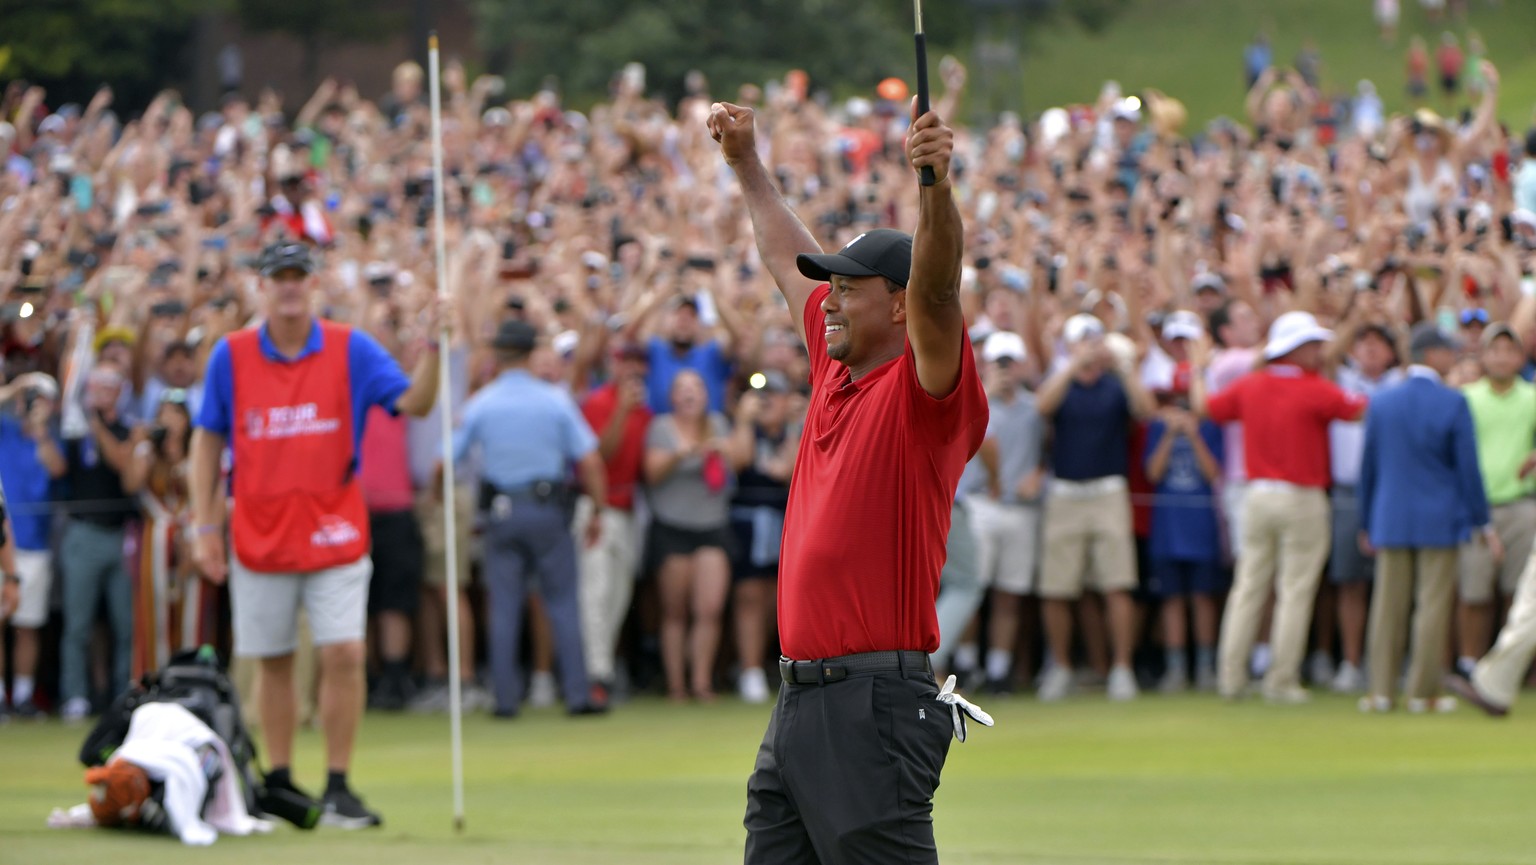 Tiger Woods celebrates after picking up his putt for par on the 18th green to win the final round of the Tour Championship golf tournament Sunday, Sept. 23, 2018, in Atlanta. (Hyosub Shin/Atlanta Jour ...